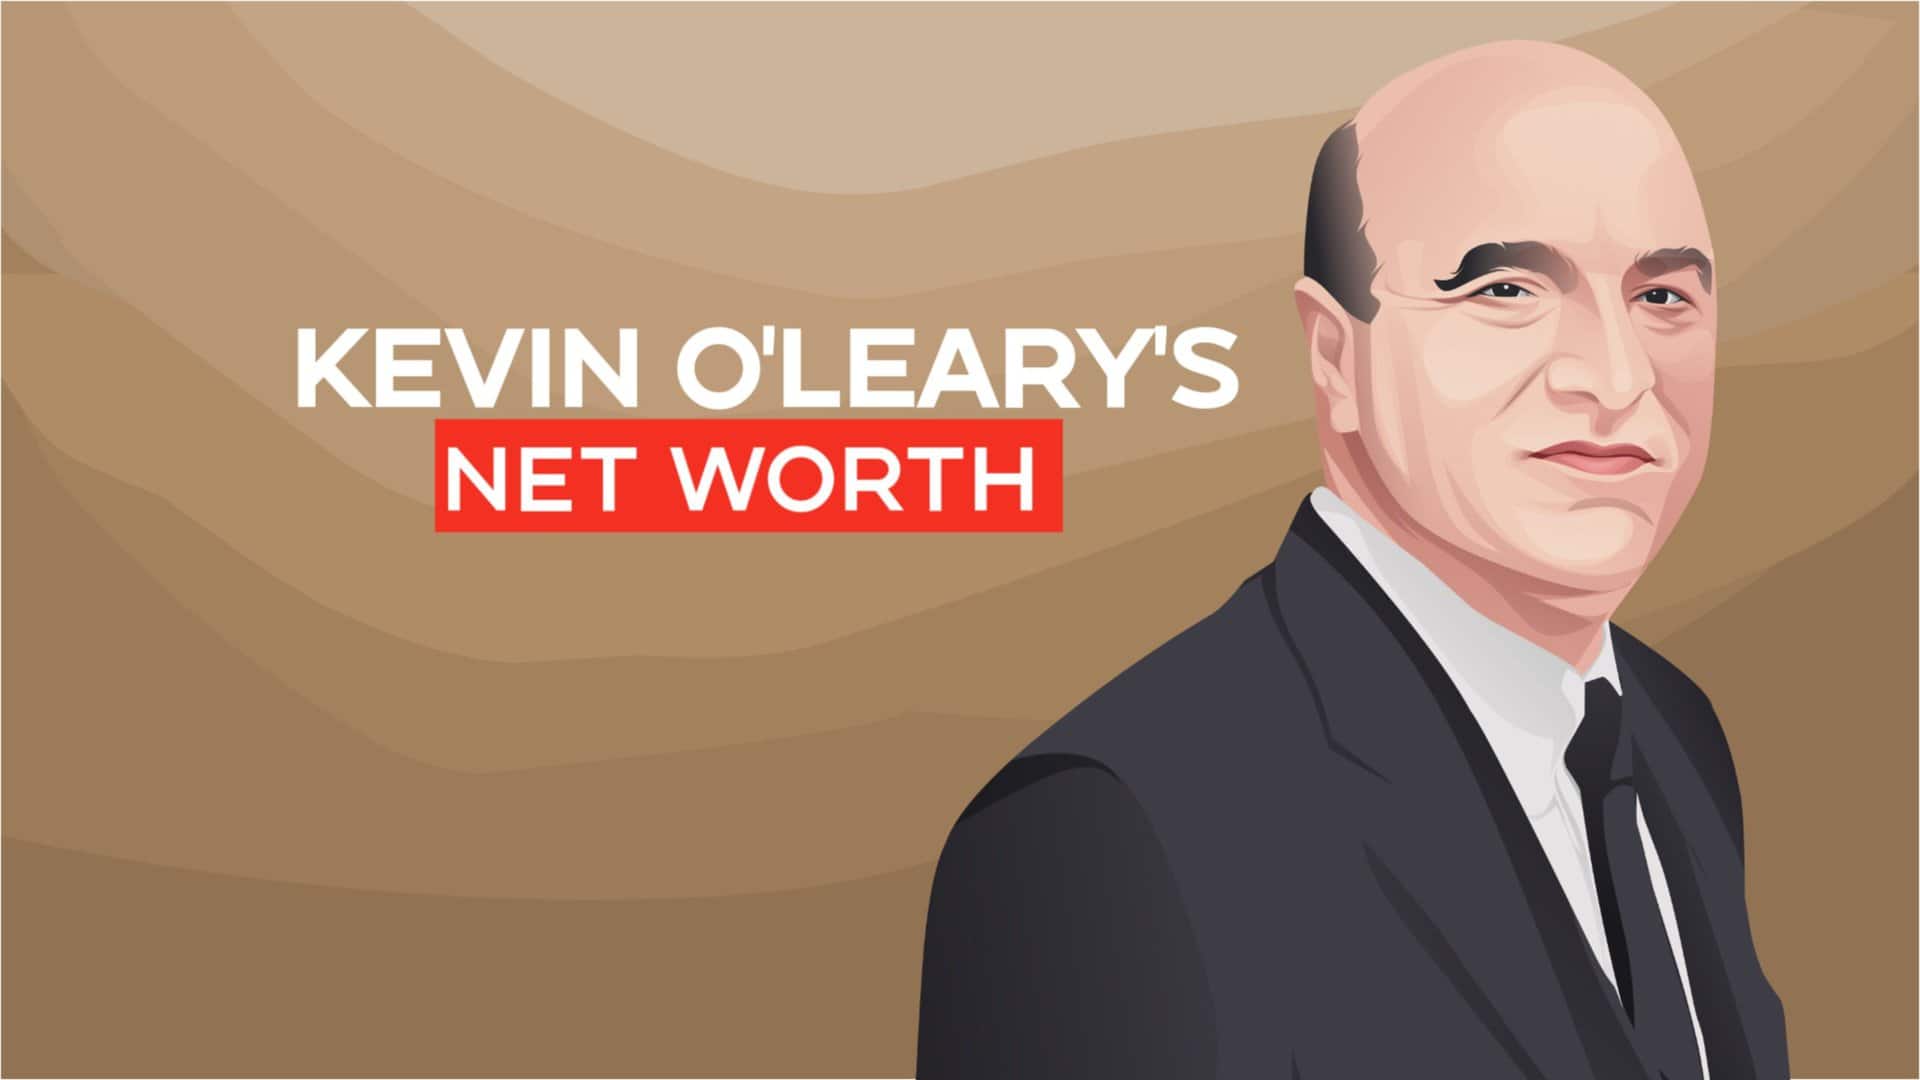 Kevin O'Leary's net worth